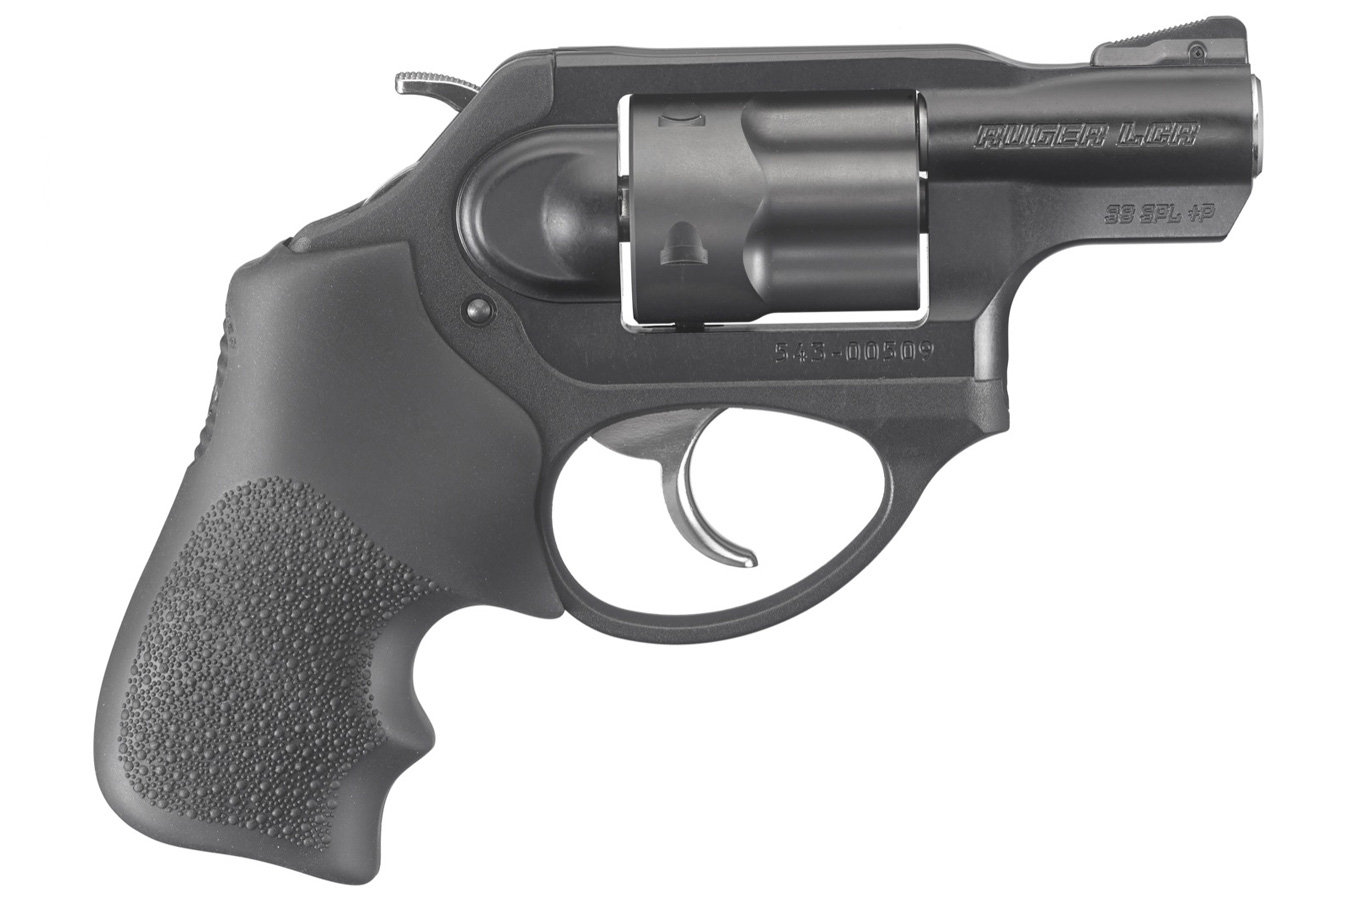 No. 20 Best Selling: RUGER LCR-X 38SPL DOUBLE ACTION REVOLVER